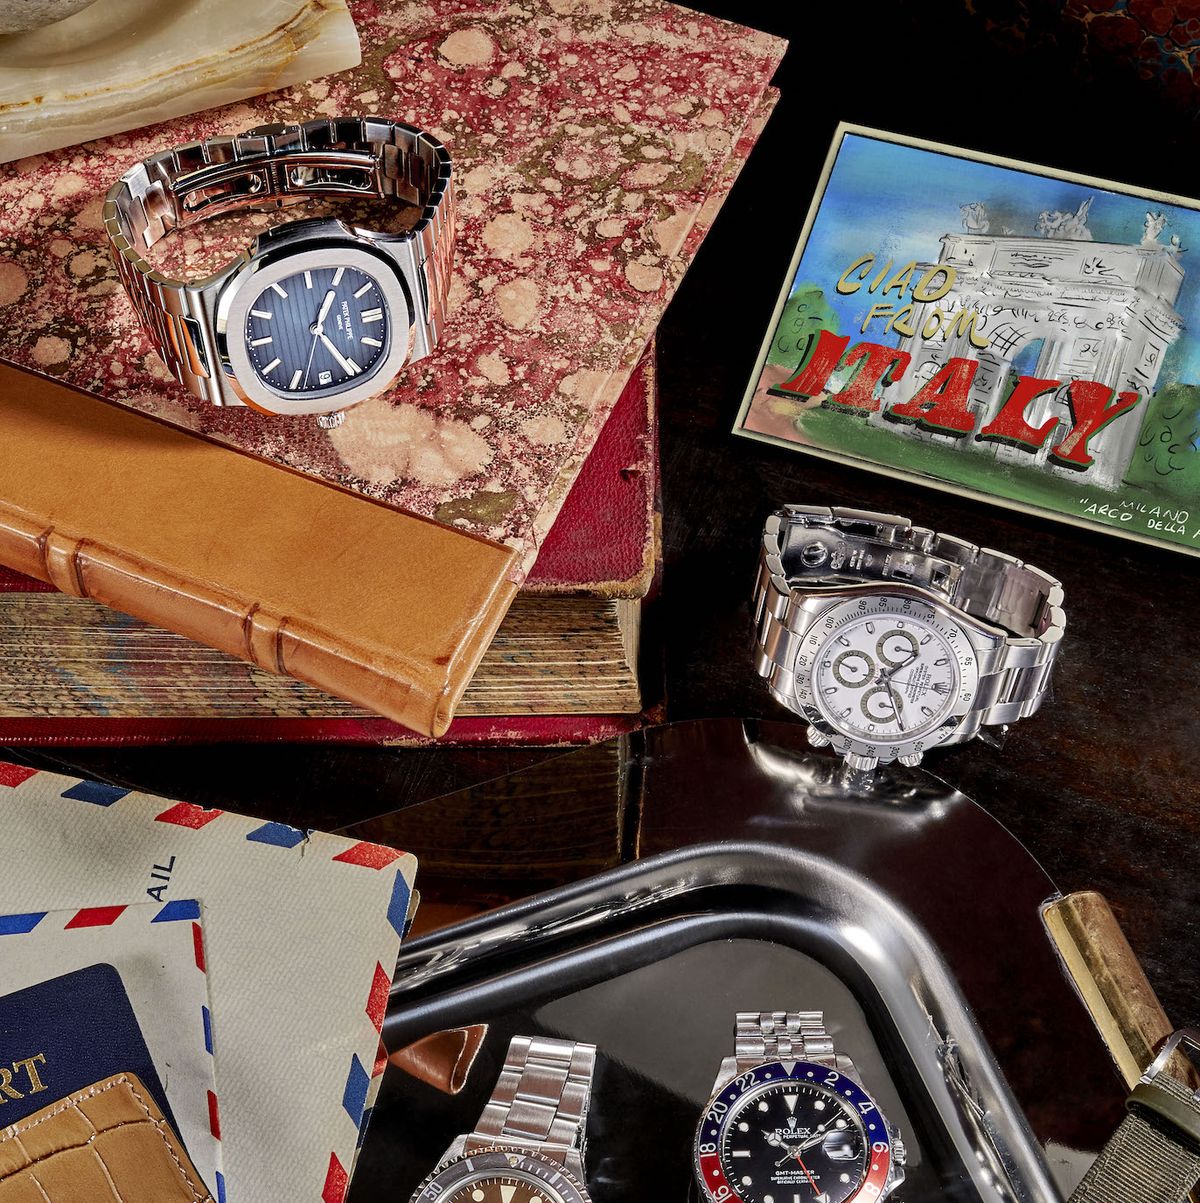 IWC vs. Rolex: Which Has a Better Resale Value?